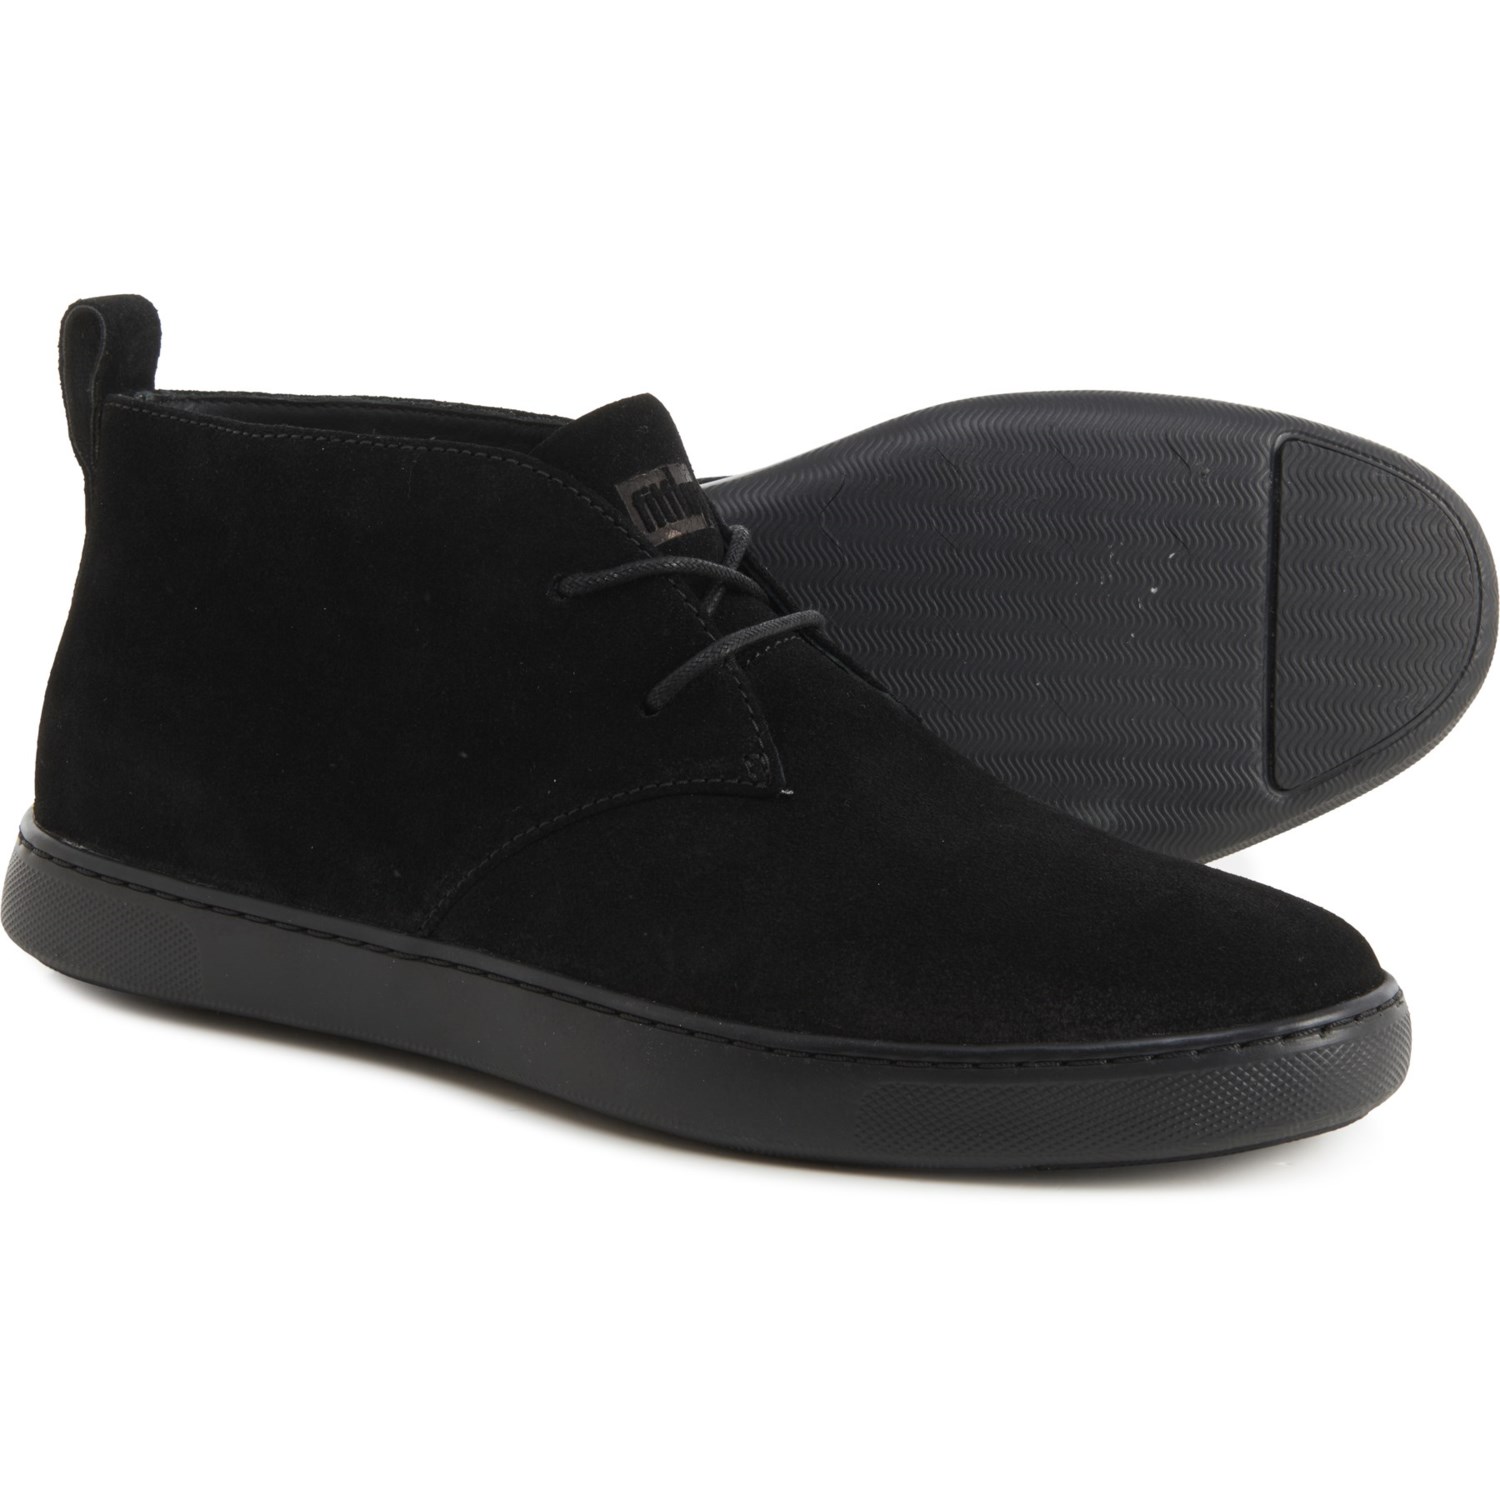 FitFlop Zackery Chukka Boots - Suede (For Men)